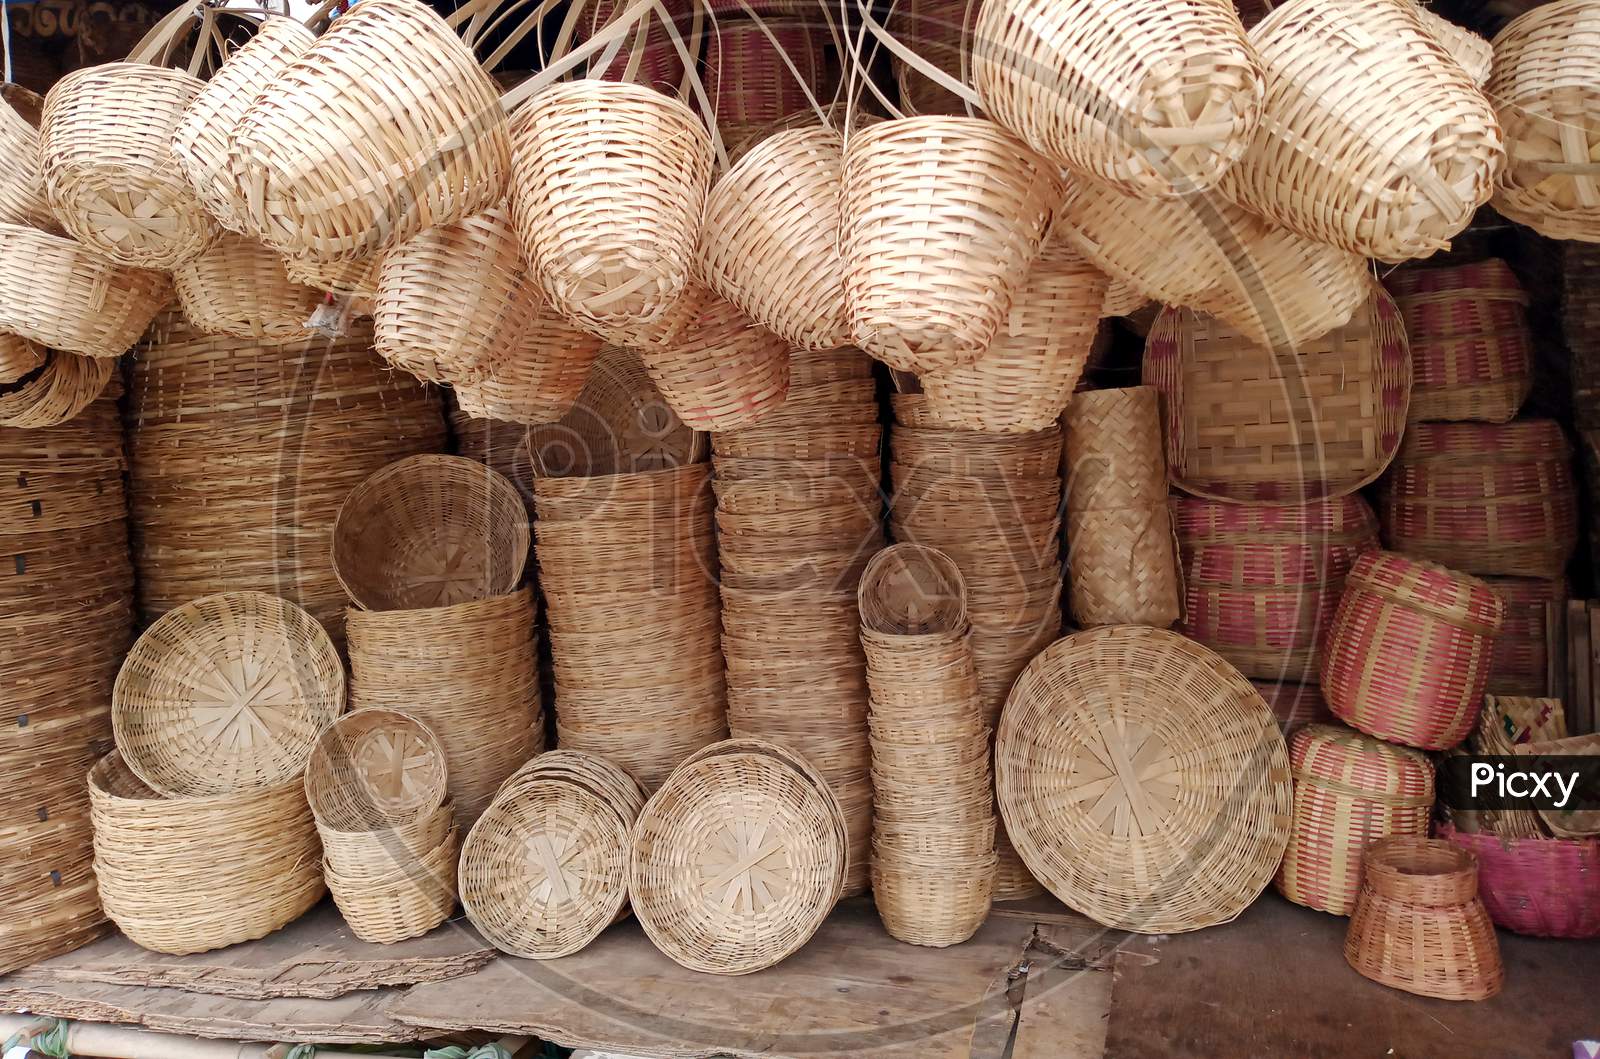 Cane baskets hand woven stacked in a road side market in Bengaluru/India.